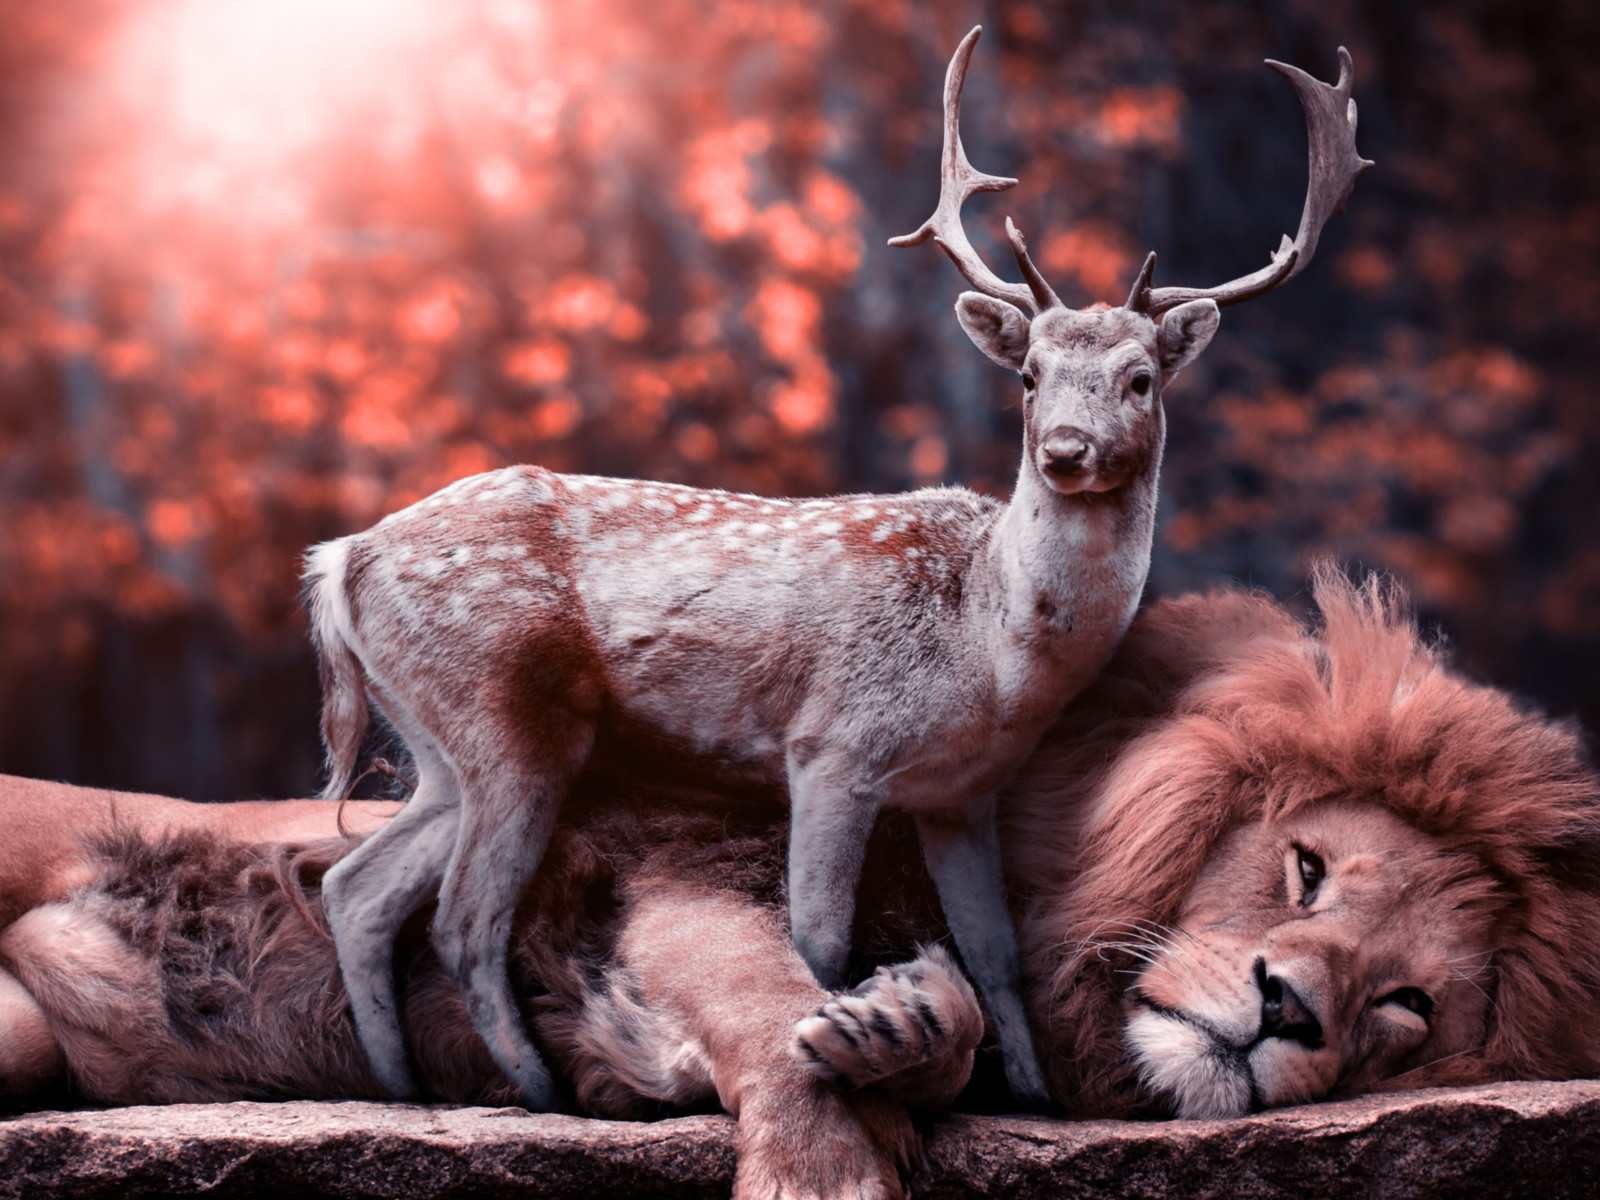 The lion and the deer wallpaper 1600x1200